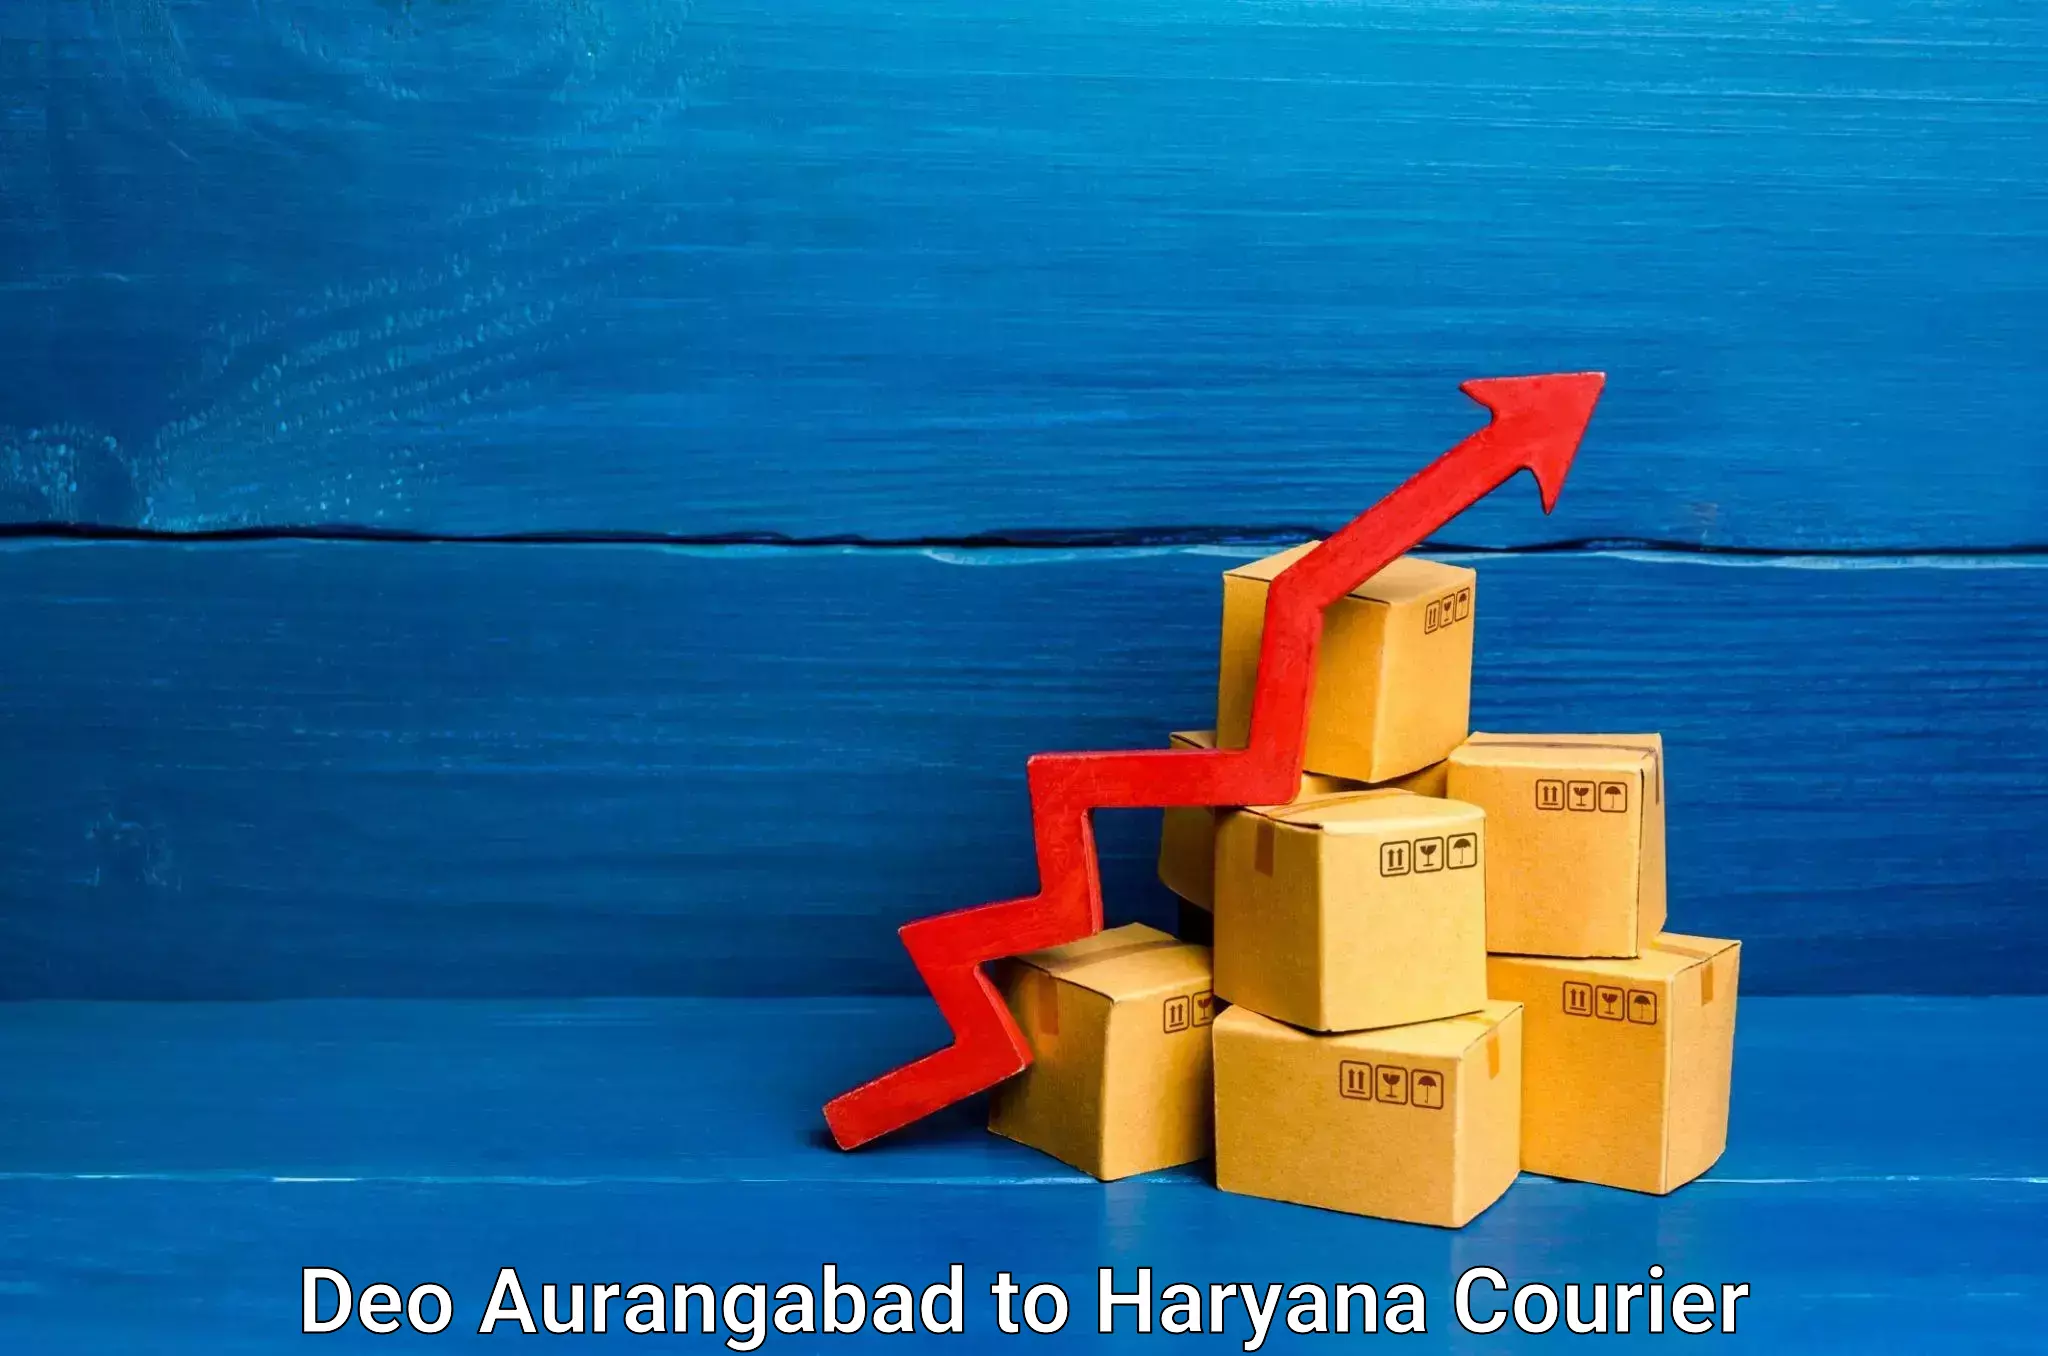 Professional relocation services Deo Aurangabad to Sirsa